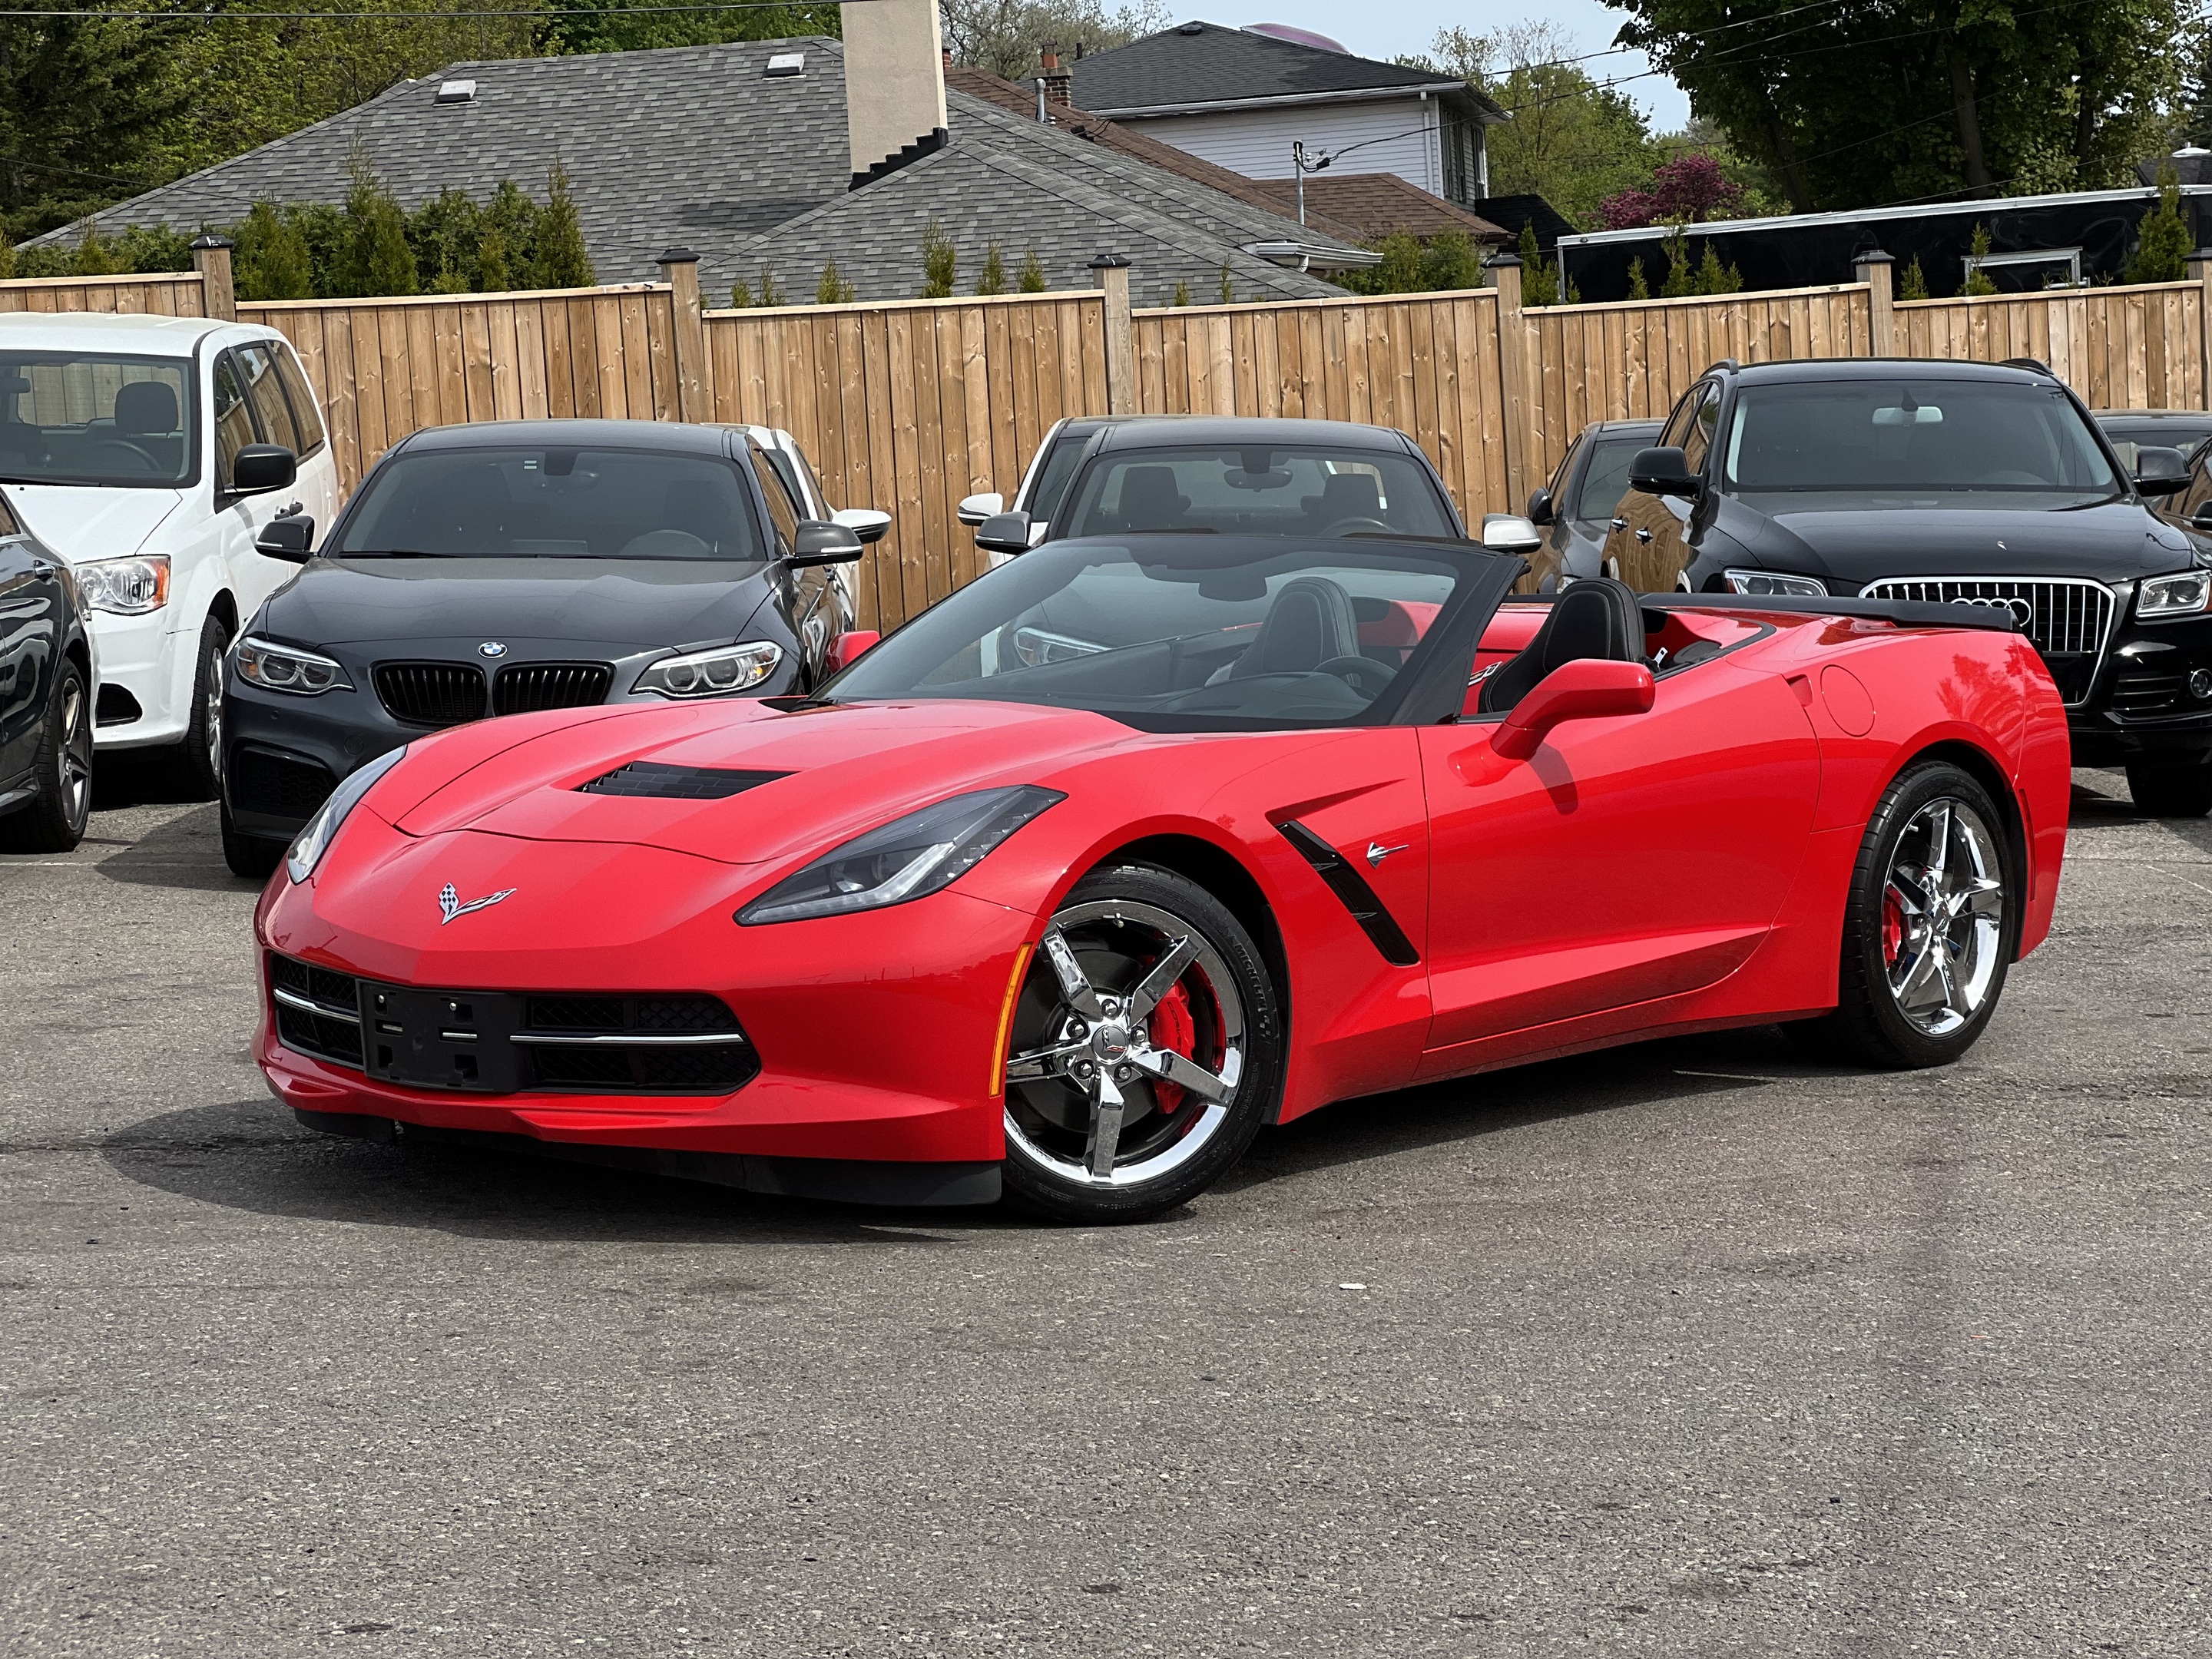 2014 Chevrolet Corvette Stingray Convertible / Torch Red / CleanCarfax-LOW KMS!